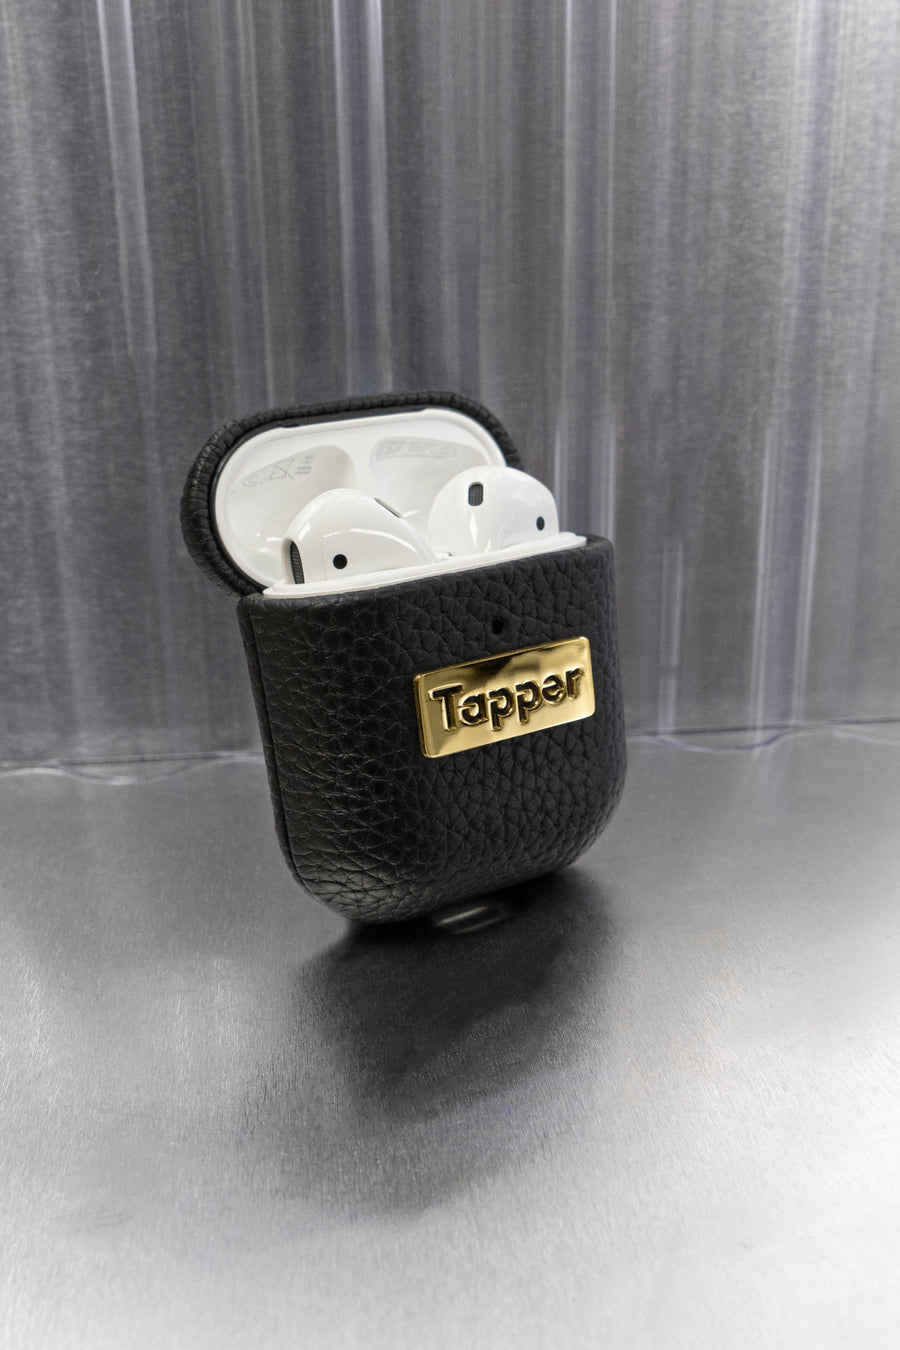 Tapper's luxurious black genuine cow leather AirPods case protects and elevates the look of your AirPods. The luxurious, protective case for AirPods with a metal logo plate in real 18k gold plating steps up your AirPods game. The next must-have high end protective Apple AirPods accessory in real leather and precious metals. Compatible with AirPods (1st and 2nd generation). Designed in Sweden by Tapper. Free Express Shipping at gettapper.com